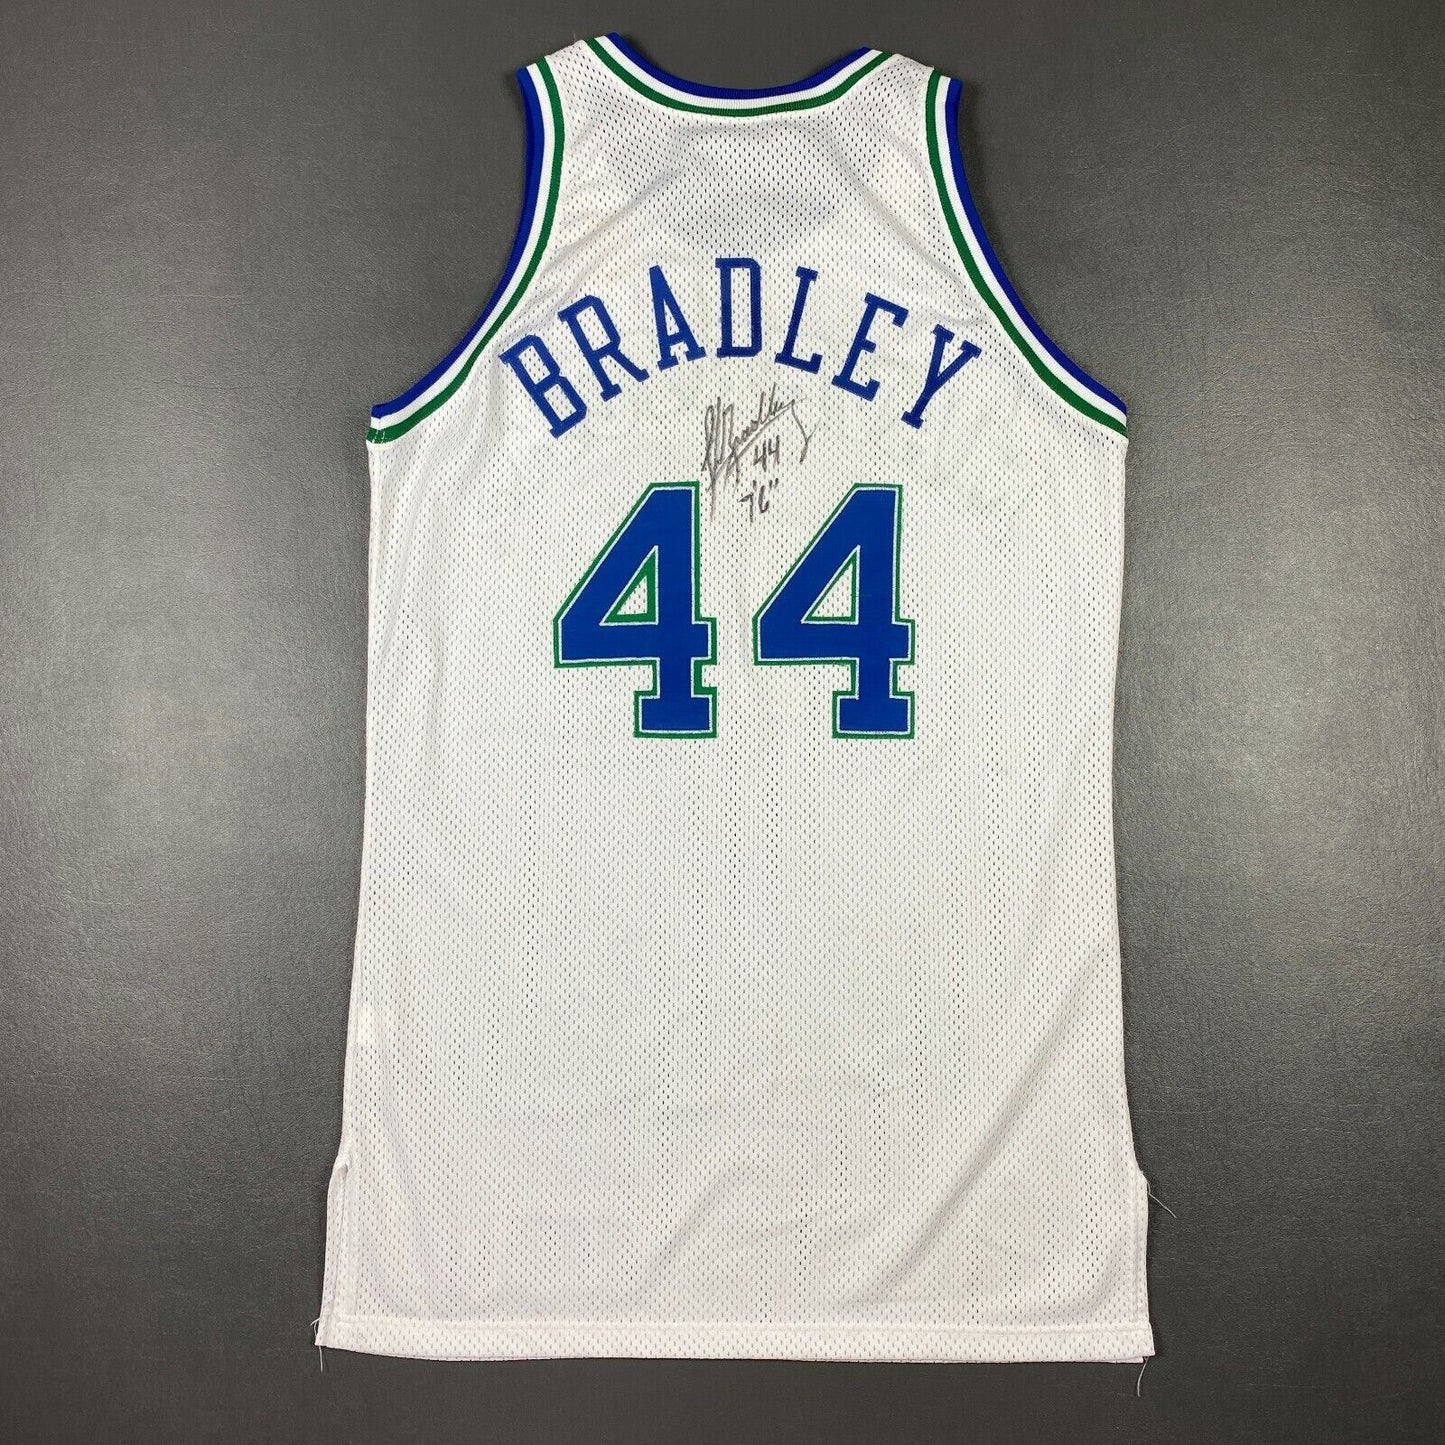 100% Authentic Shawn Bradley 96 97 Mavericks Game Worn Autographed Jersey Mears